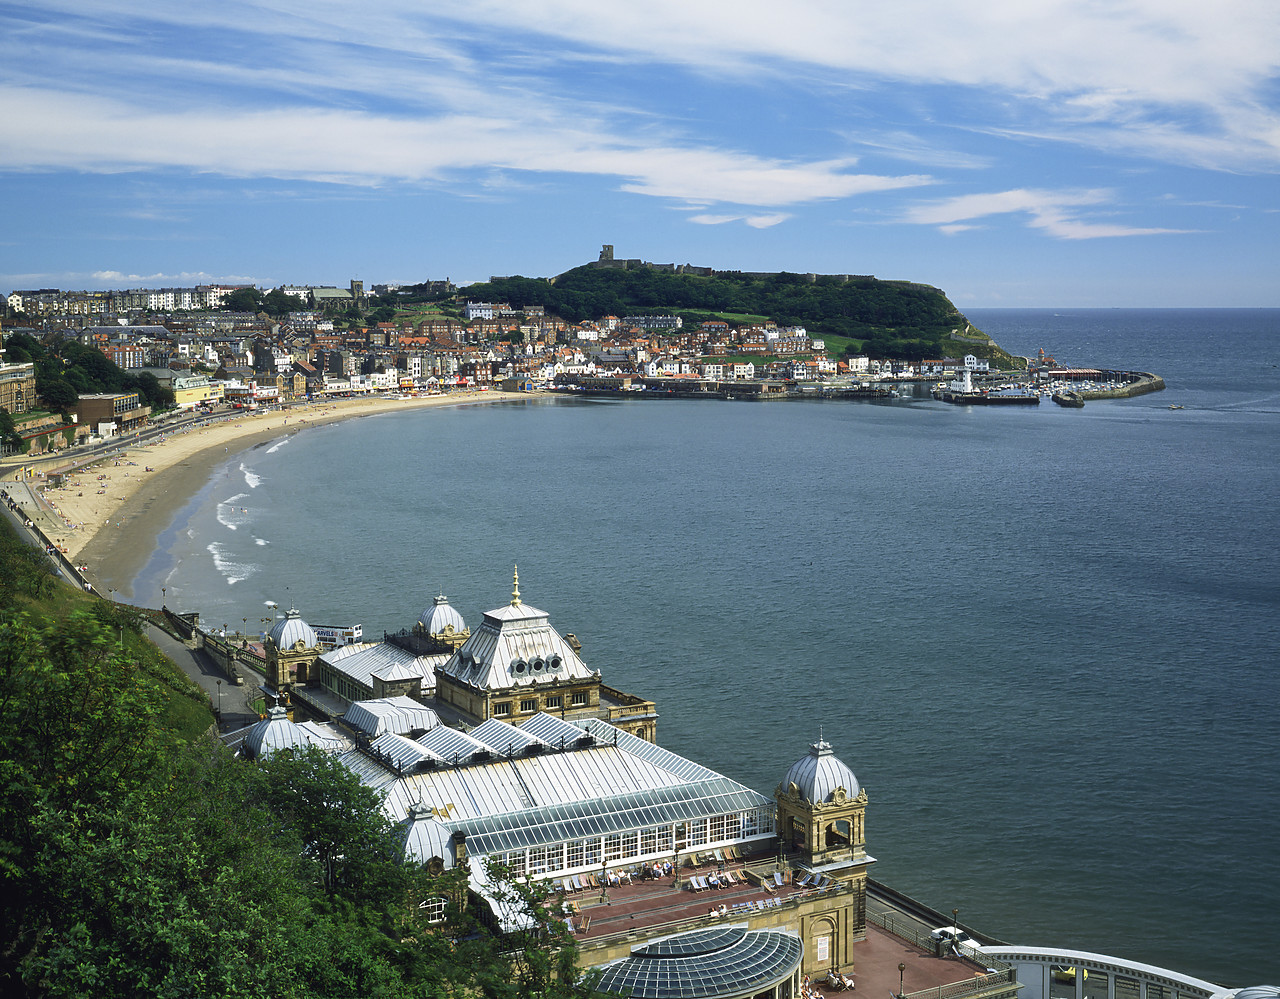 #881448-2 - View overe Scarborough, North Yorkshire, England